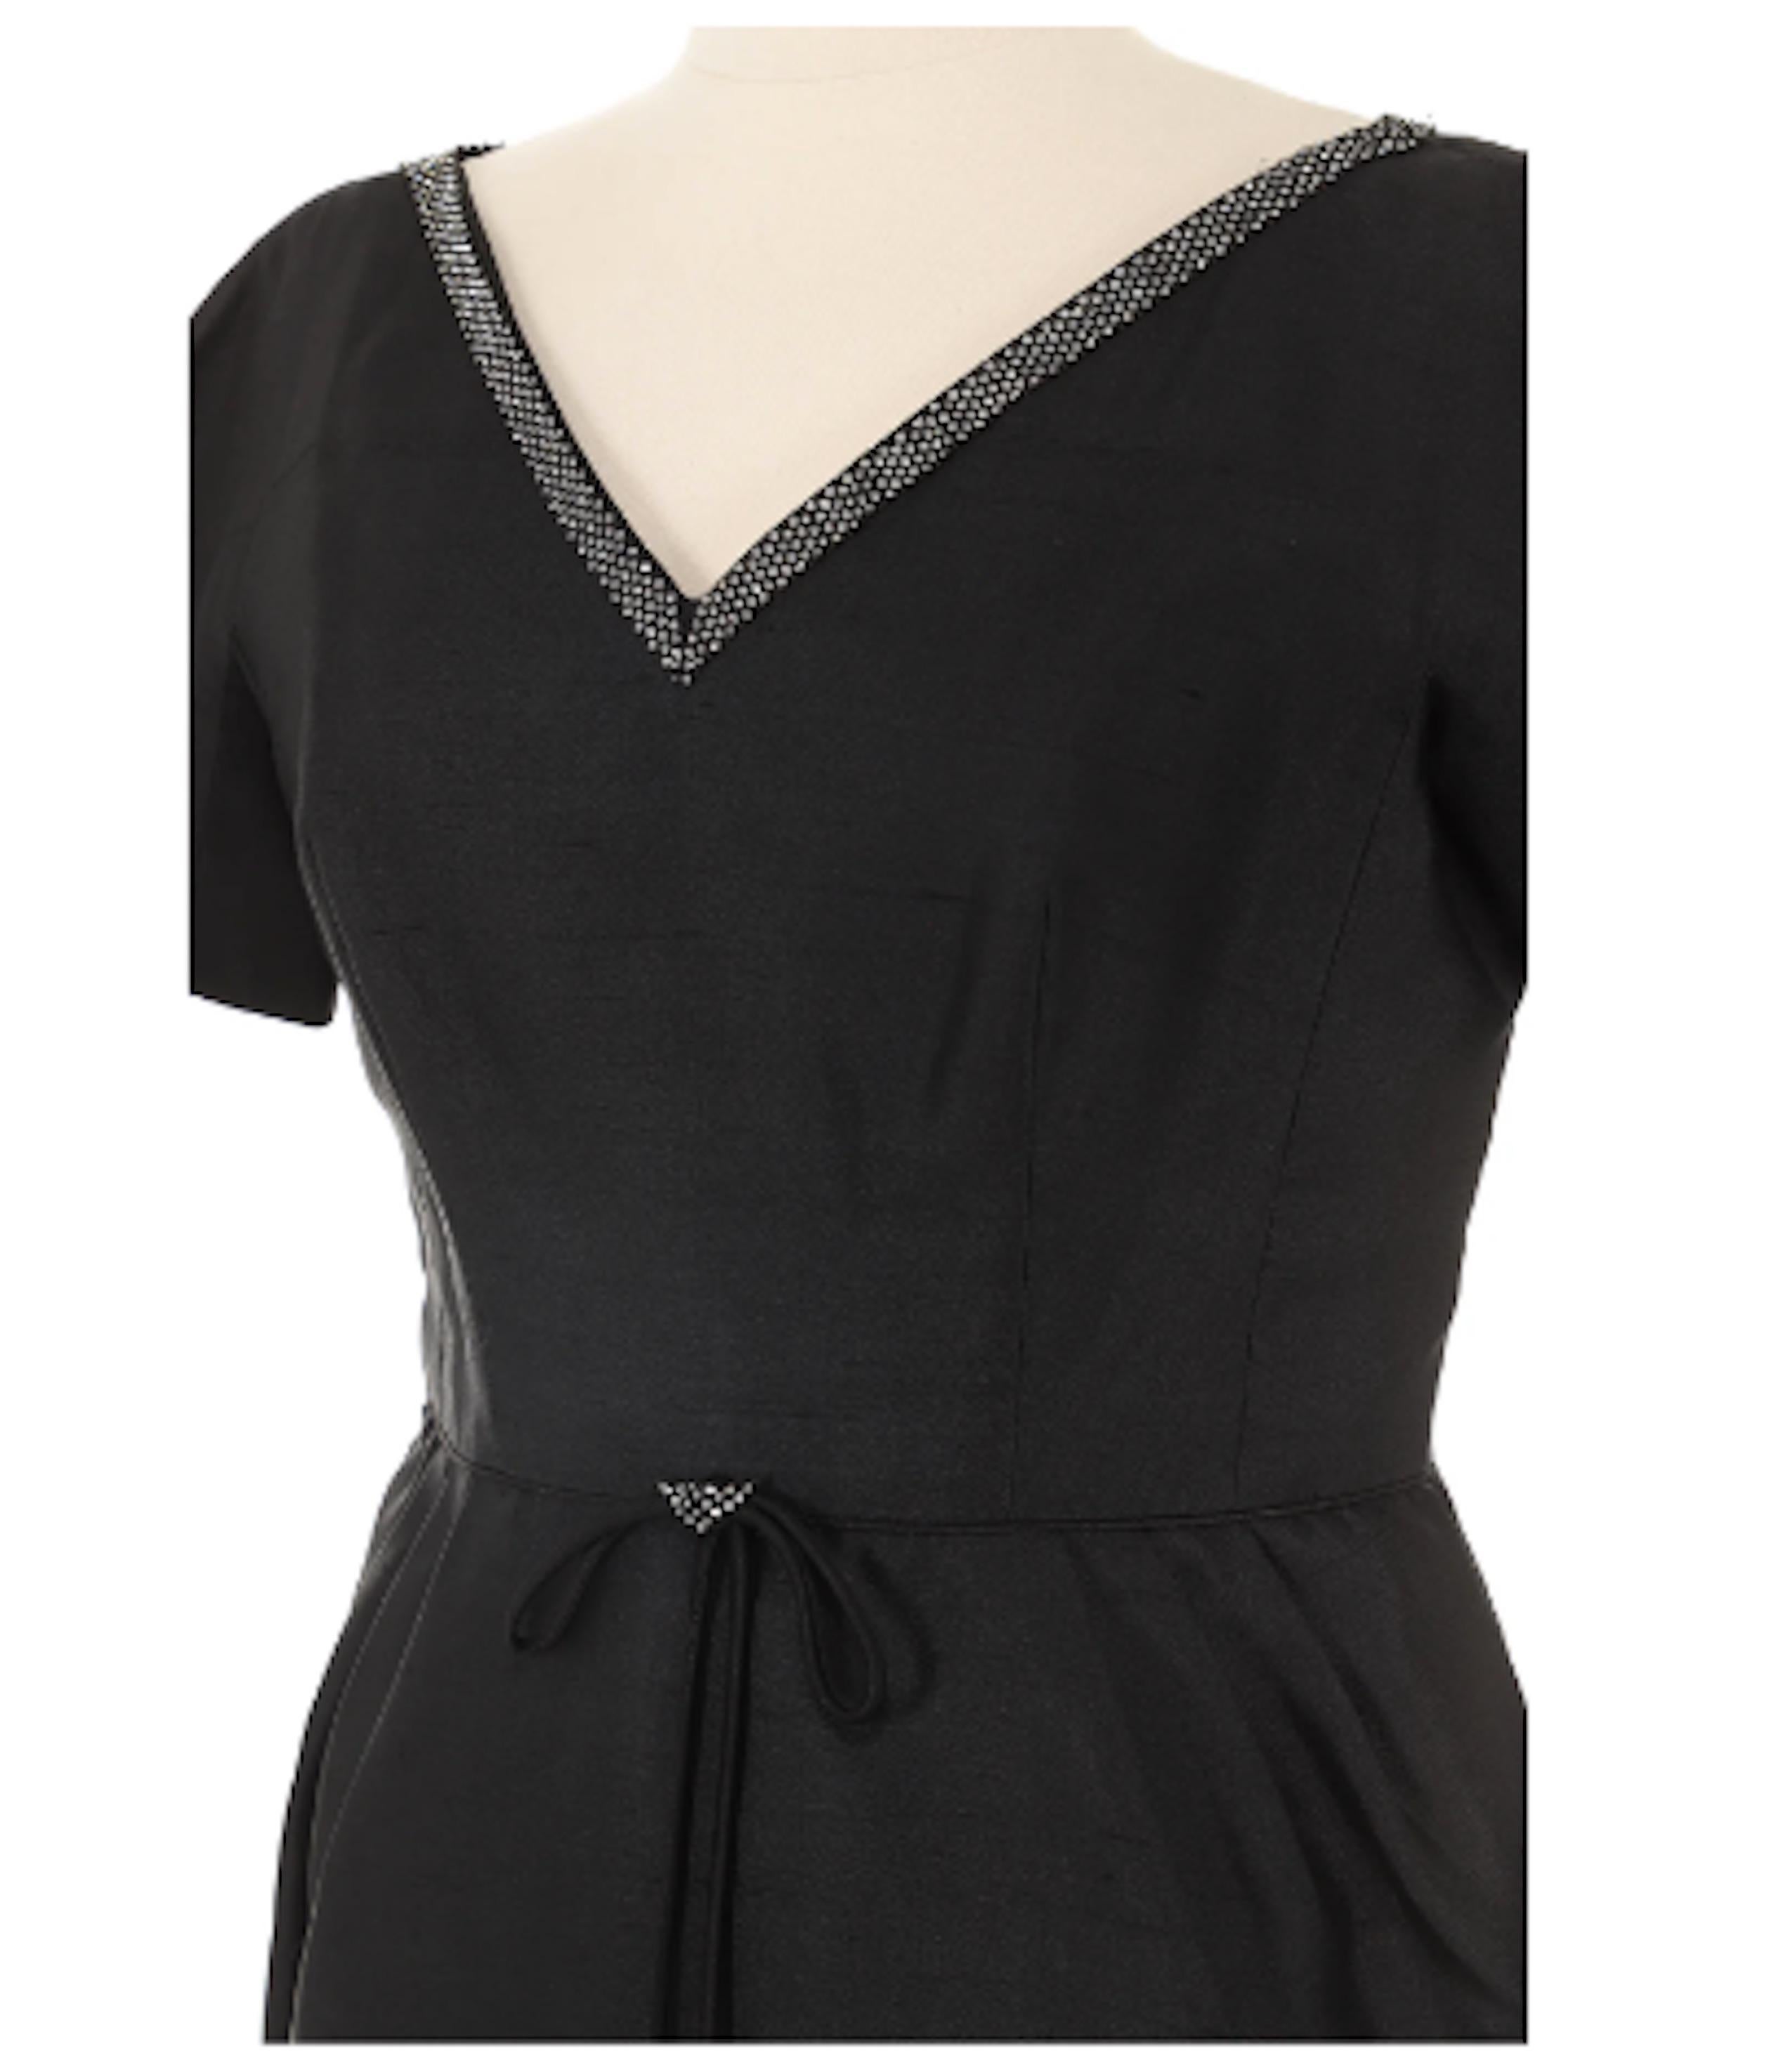 Oleg Cassini Black Embellished Cocktail Dress In Excellent Condition For Sale In New York, NY